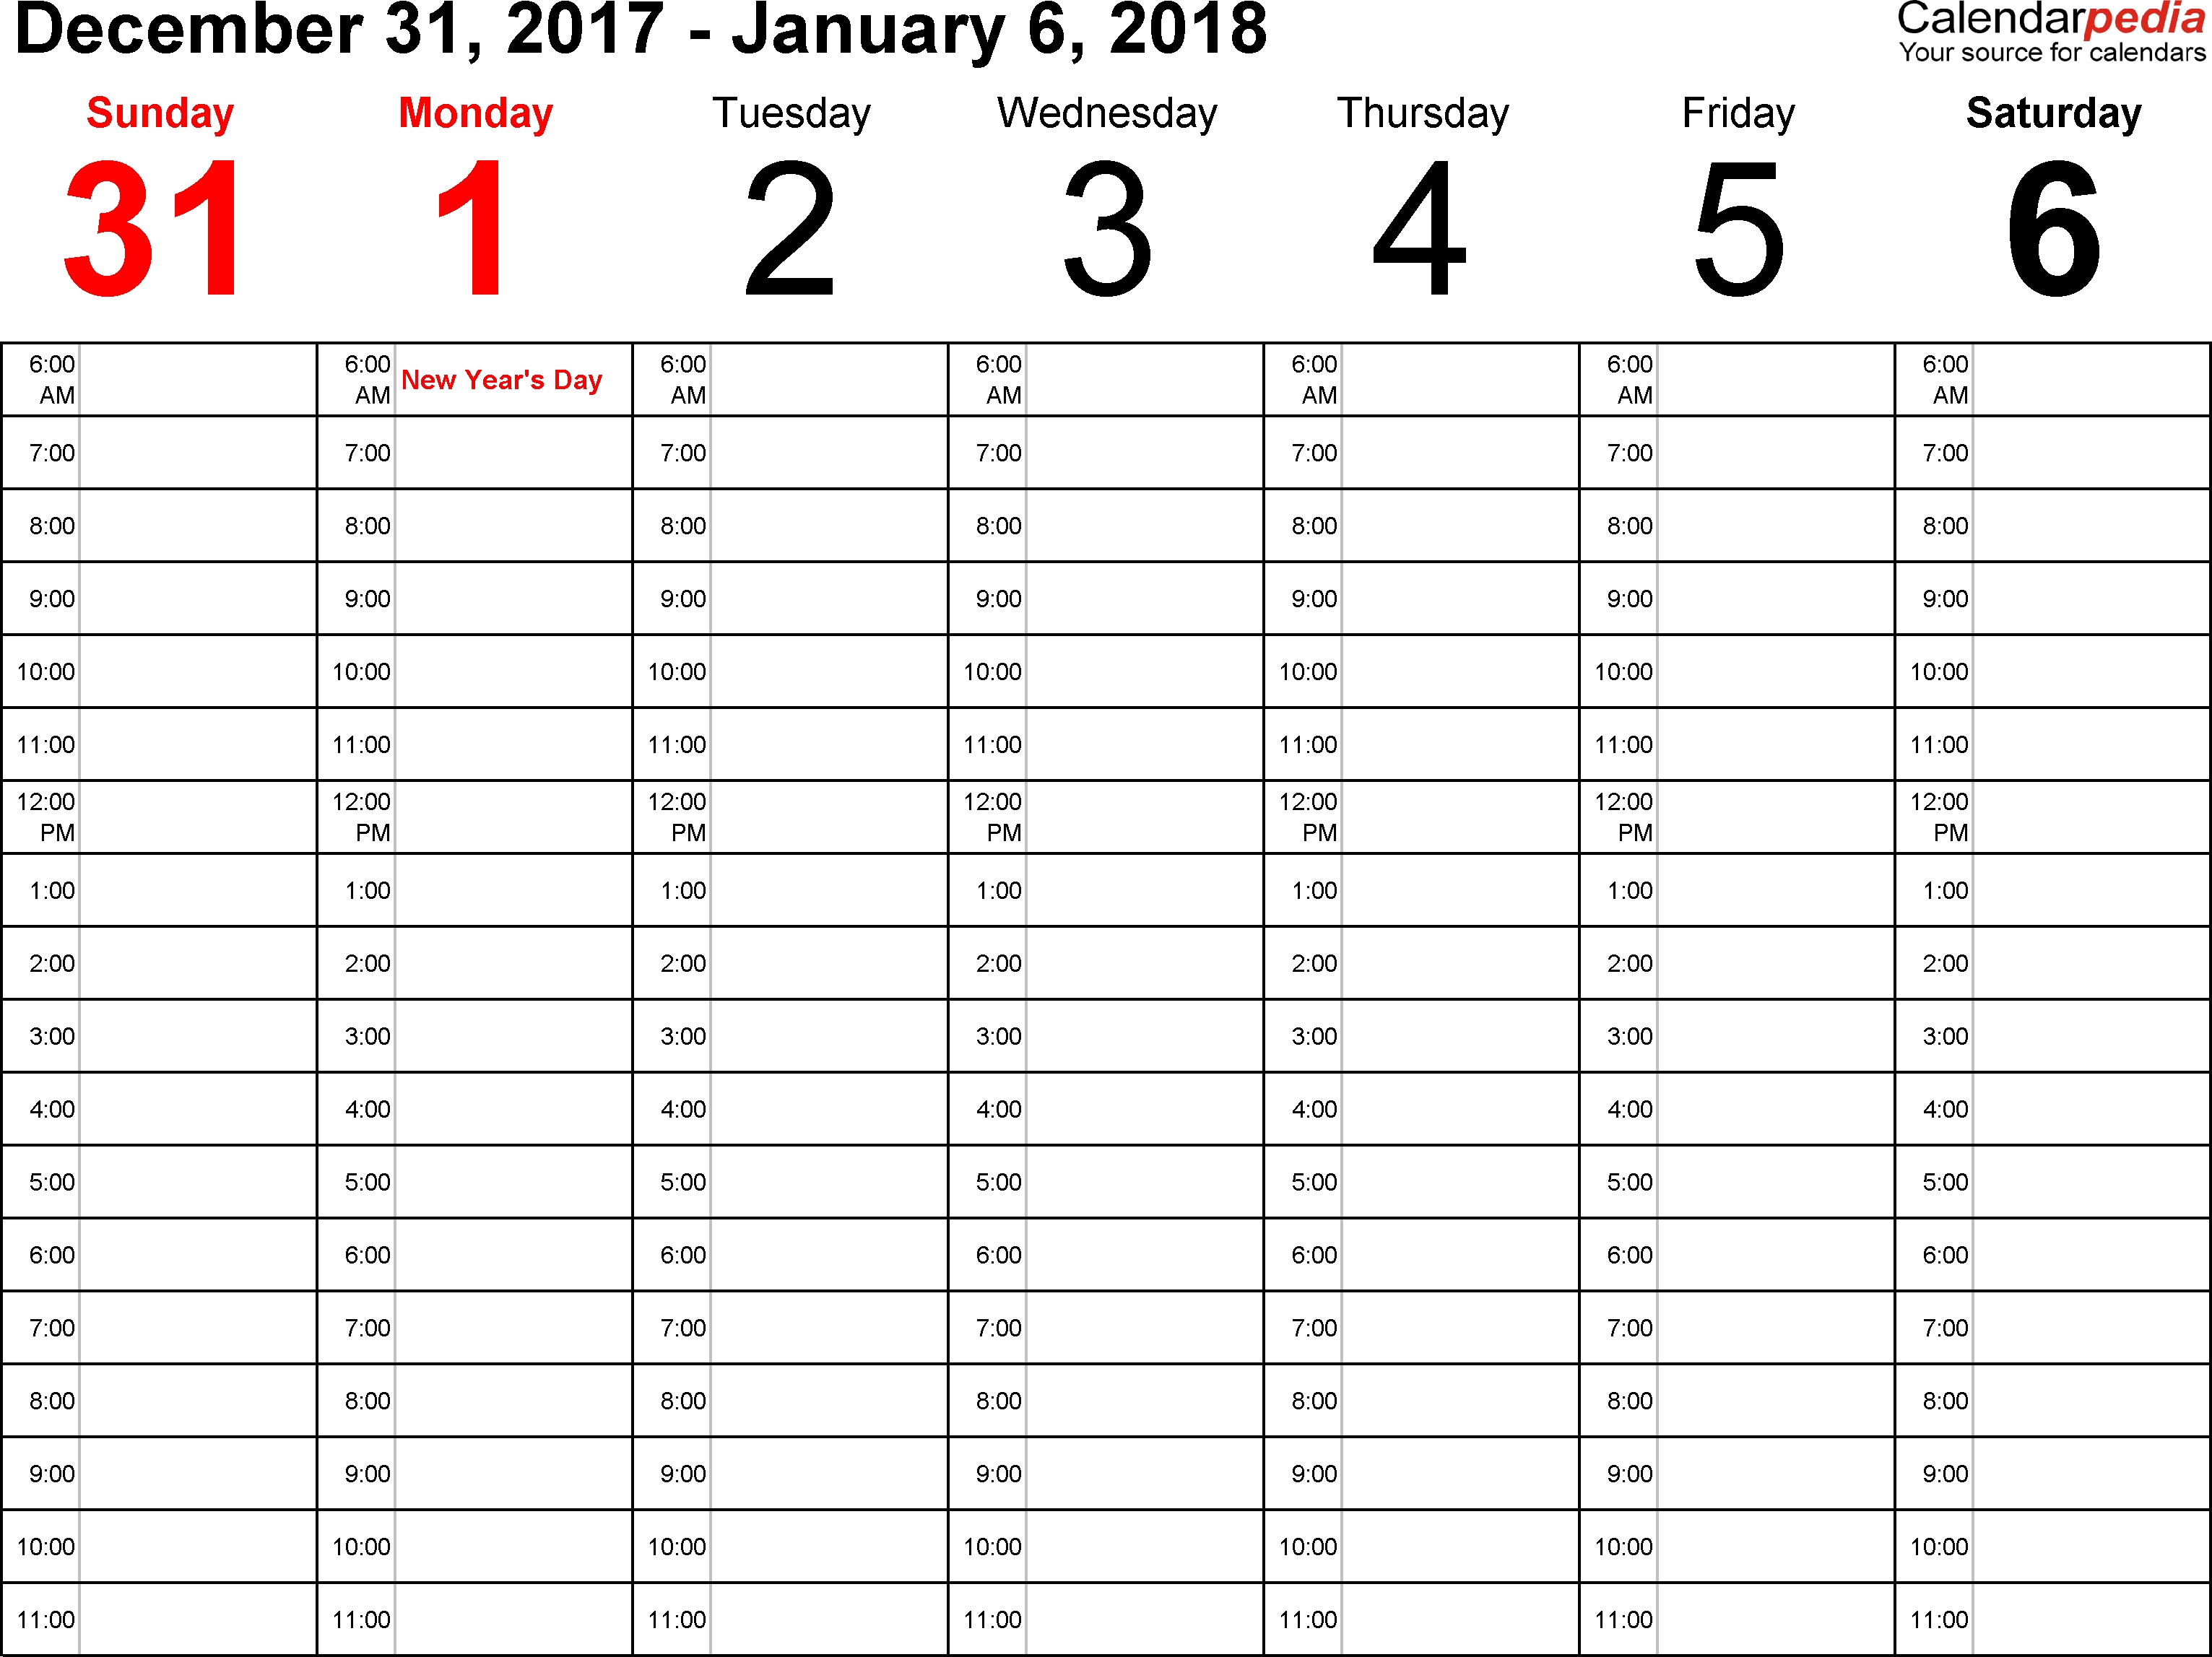 Weekly Calendar 2018 For Word - 12 Free Printable Templates intended for Printable Calendars By Month And Week